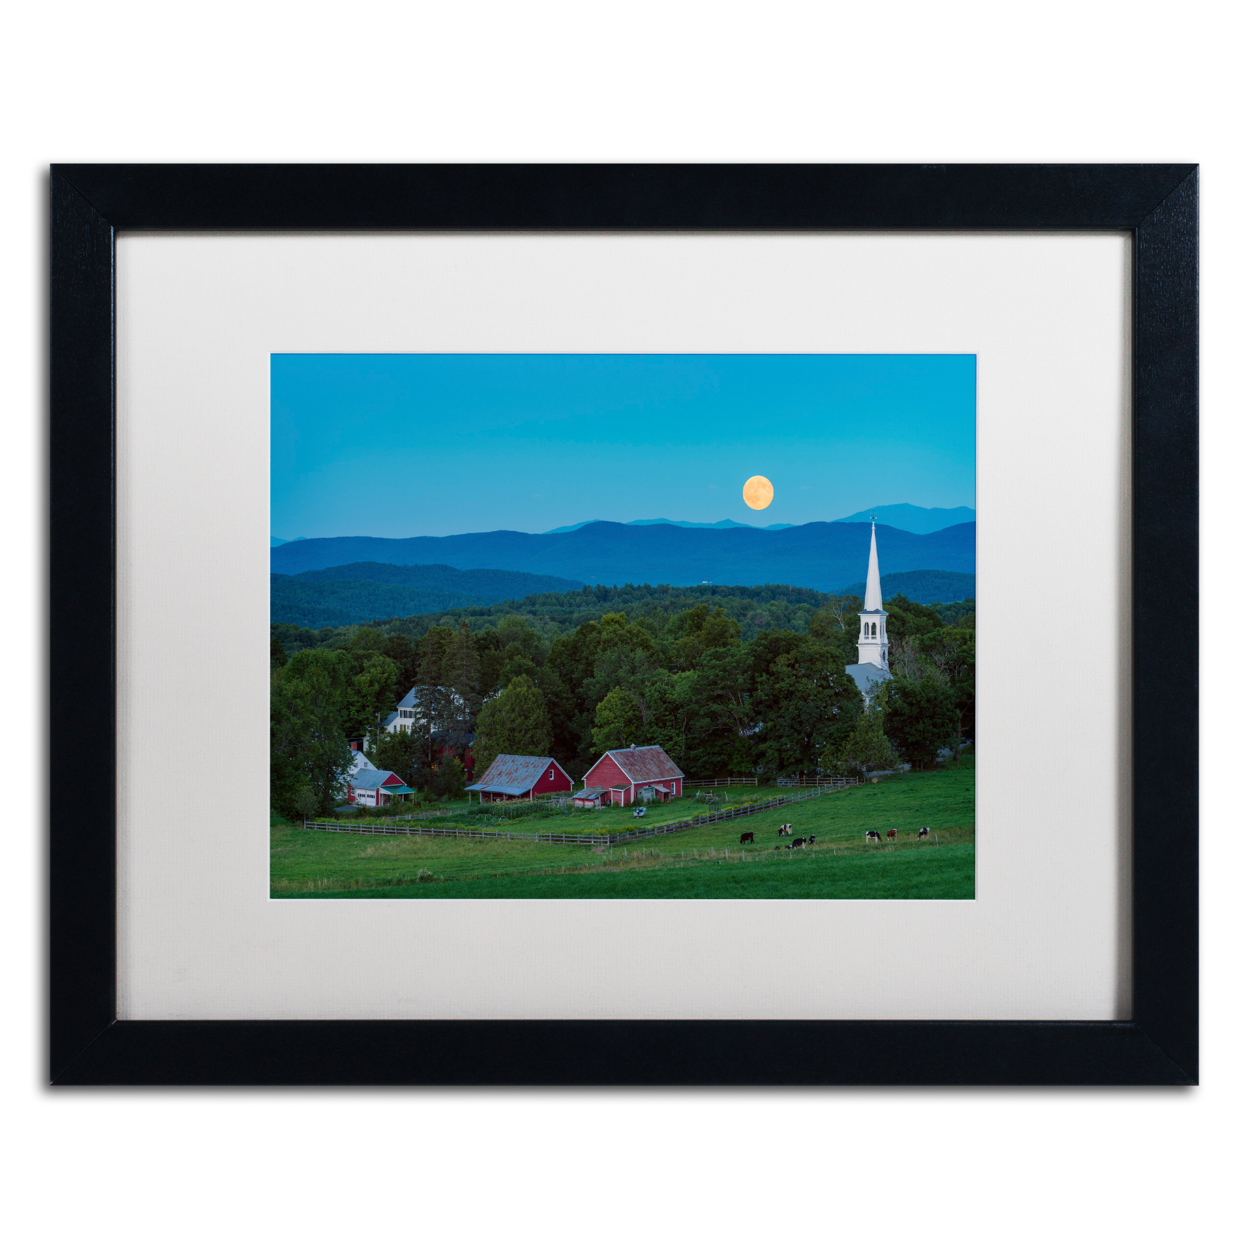 Michael Blanchette Photography 'Cow Under The Moon' Black Wooden Framed Art 18 X 22 Inches